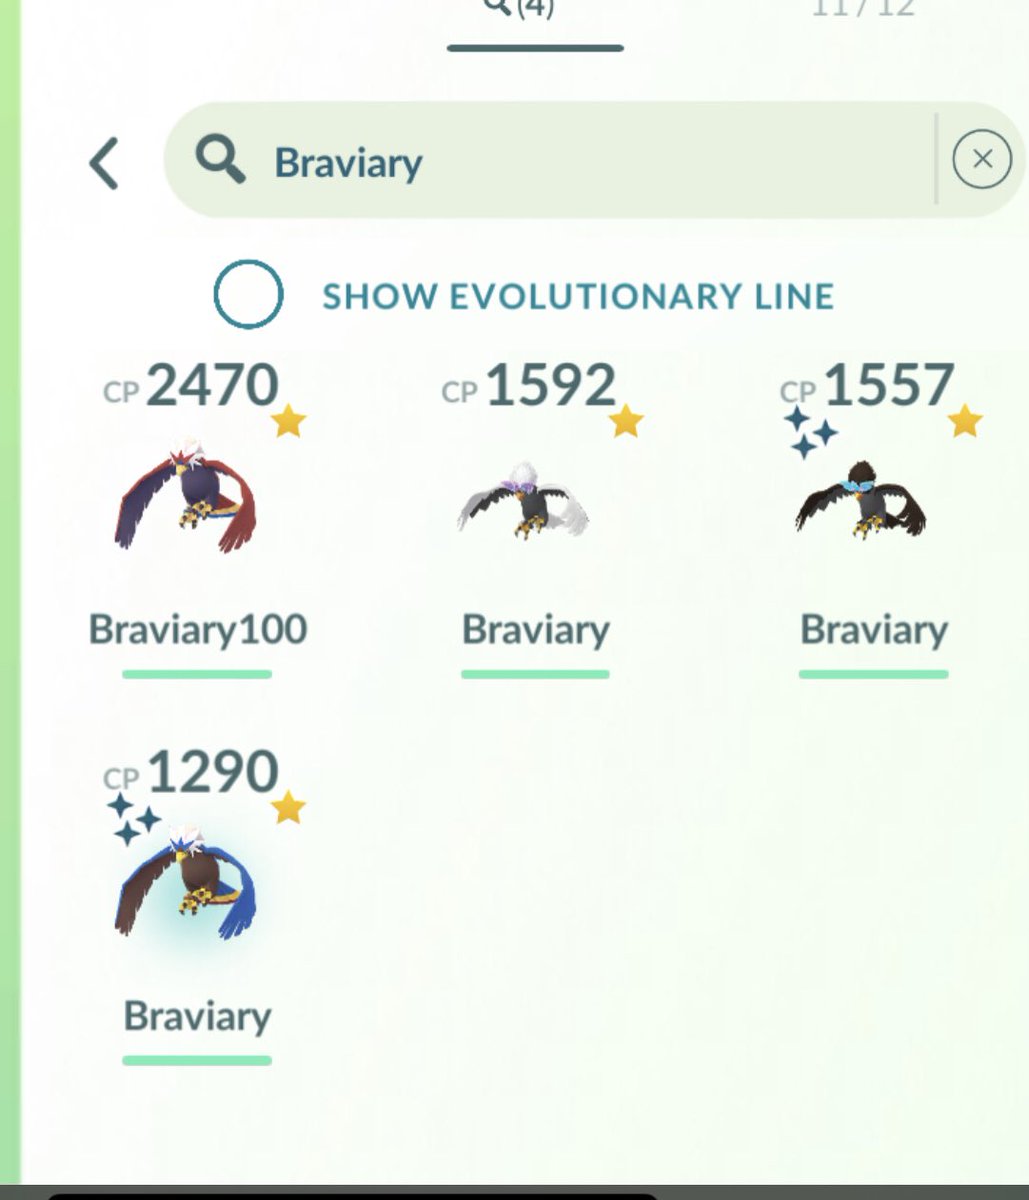 Pretty proud of my Braviary collection! 
One hundo is never enough but pleased about the one it’s there! 
Happy weekend everyone 🤩🤩
#pokemonGo